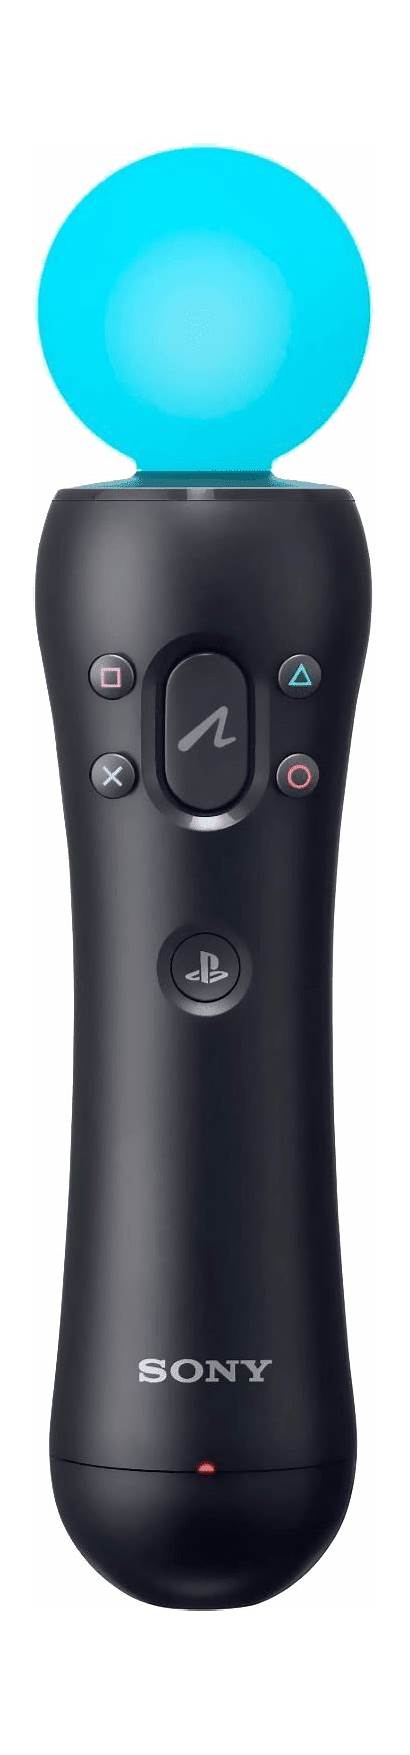 Move Controller Ps3 Ps4 Playstation Motion Sony